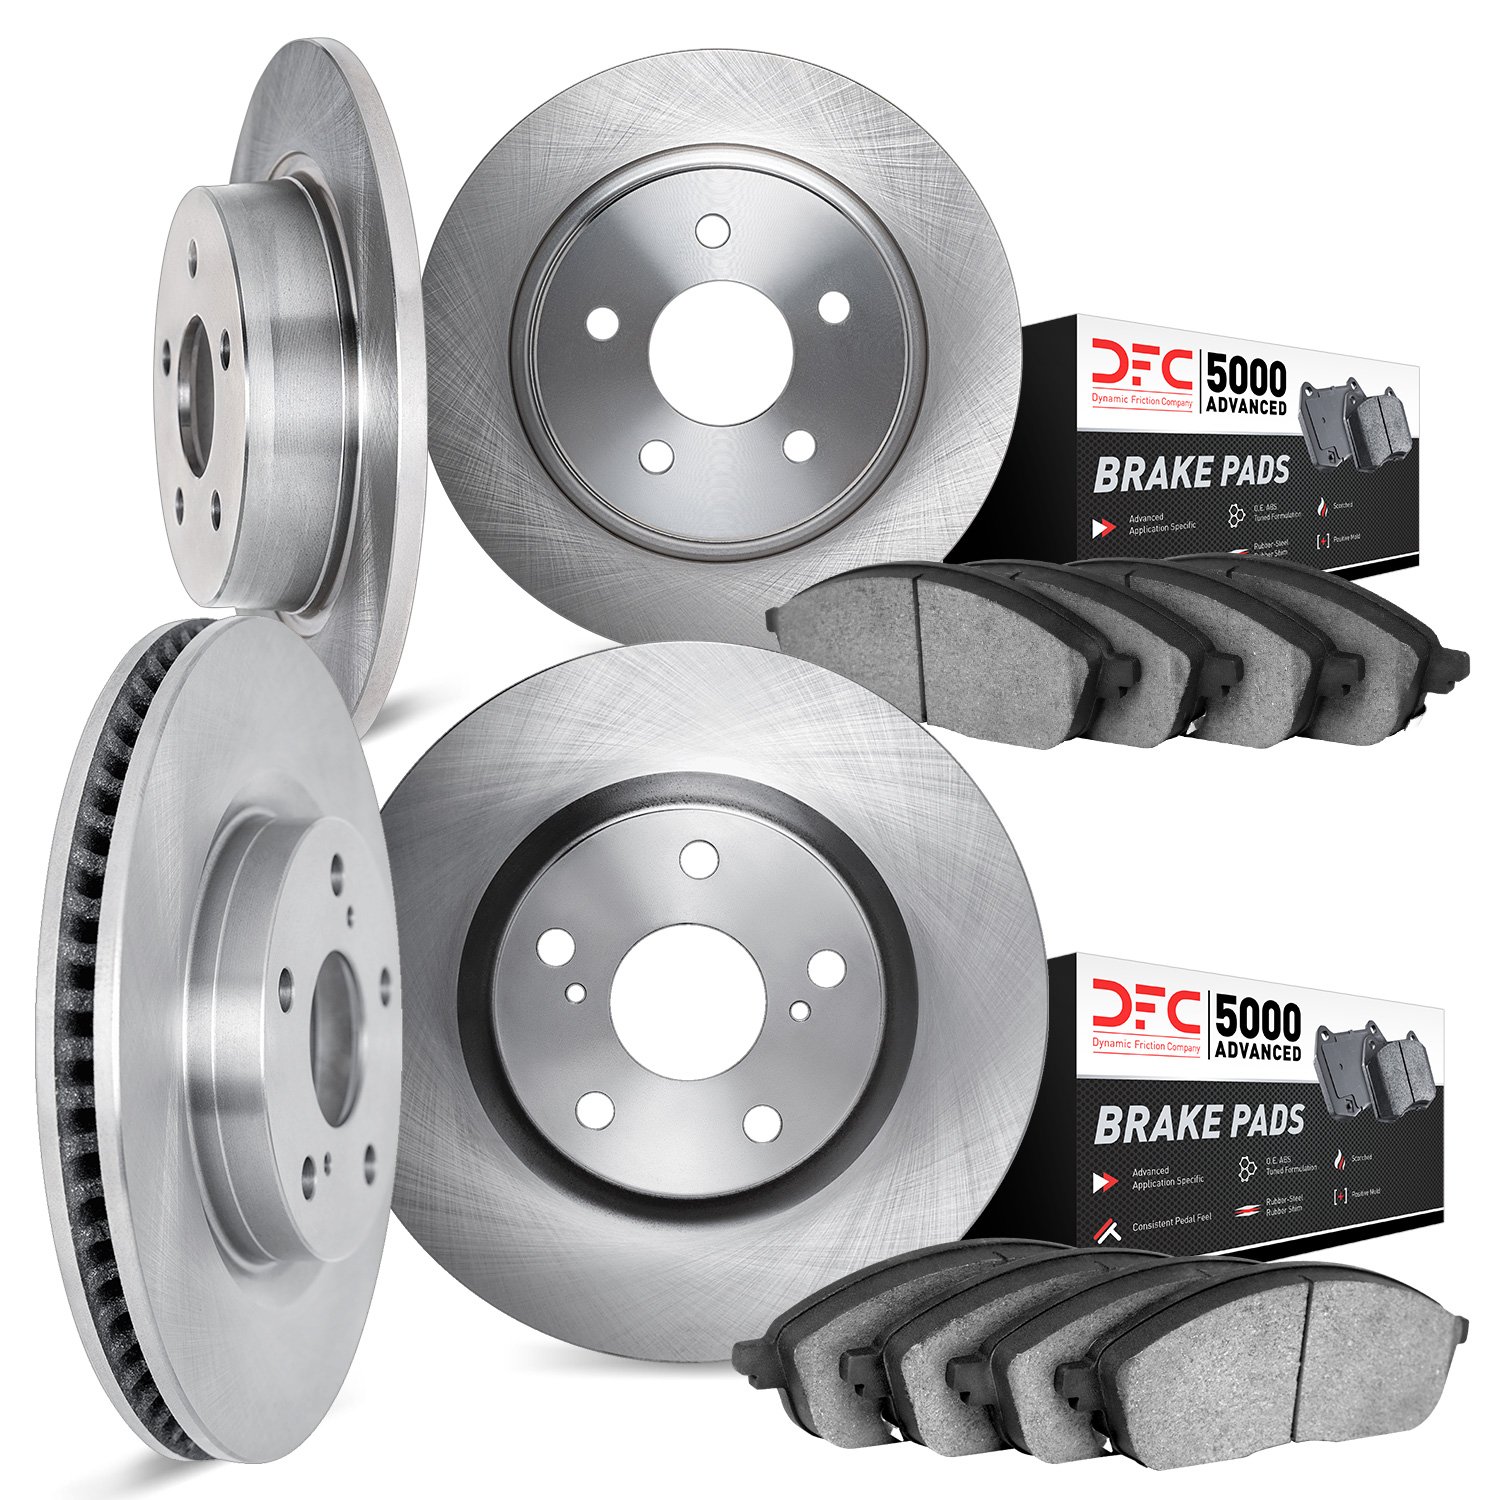 6504-54134 Brake Rotors w/5000 Advanced Brake Pads Kit, 2004-2013 Volvo, Position: Front and Rear